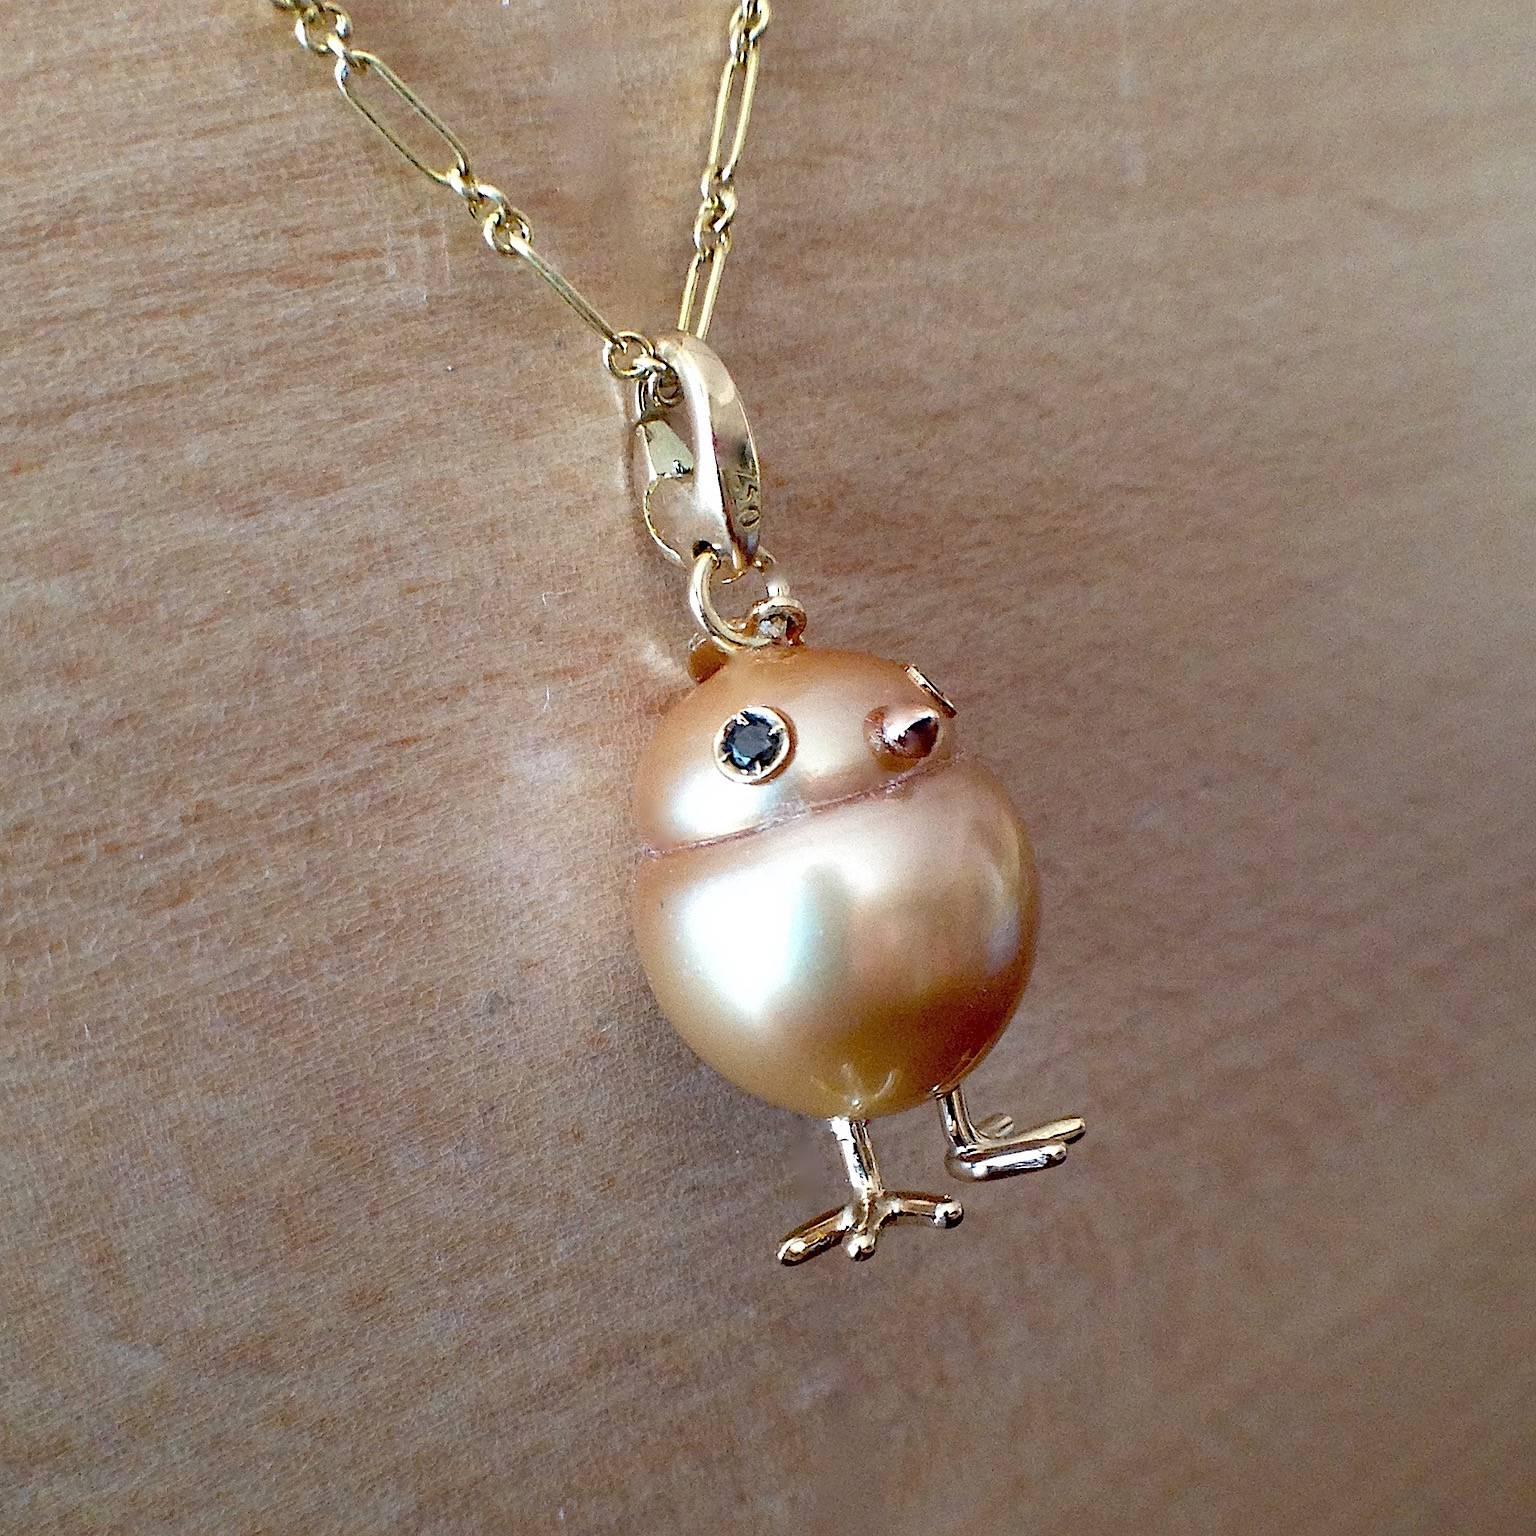 A big yellow Australian pearl has been carefully crafted to make a chick. He has his two legs, two eyes encrusted with two black diamonds and his red gold beak.
The ring of the necklace is a carabiner so it can be worn also as a beautiful charm on a